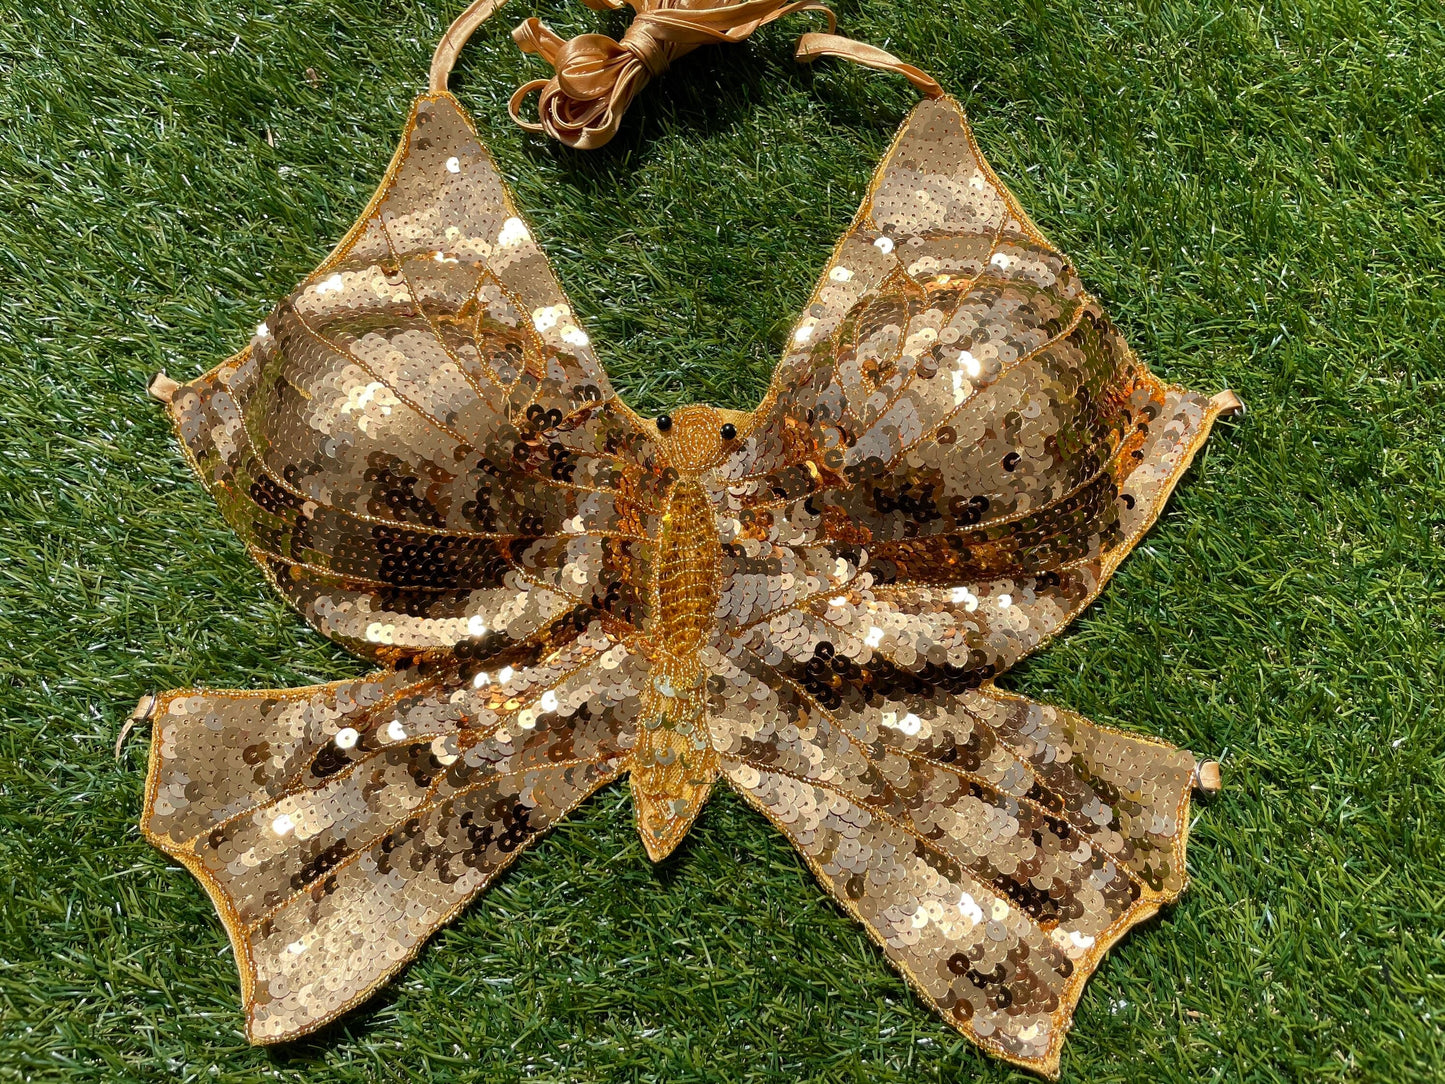 Gold Diva Butterfly Sequin Top